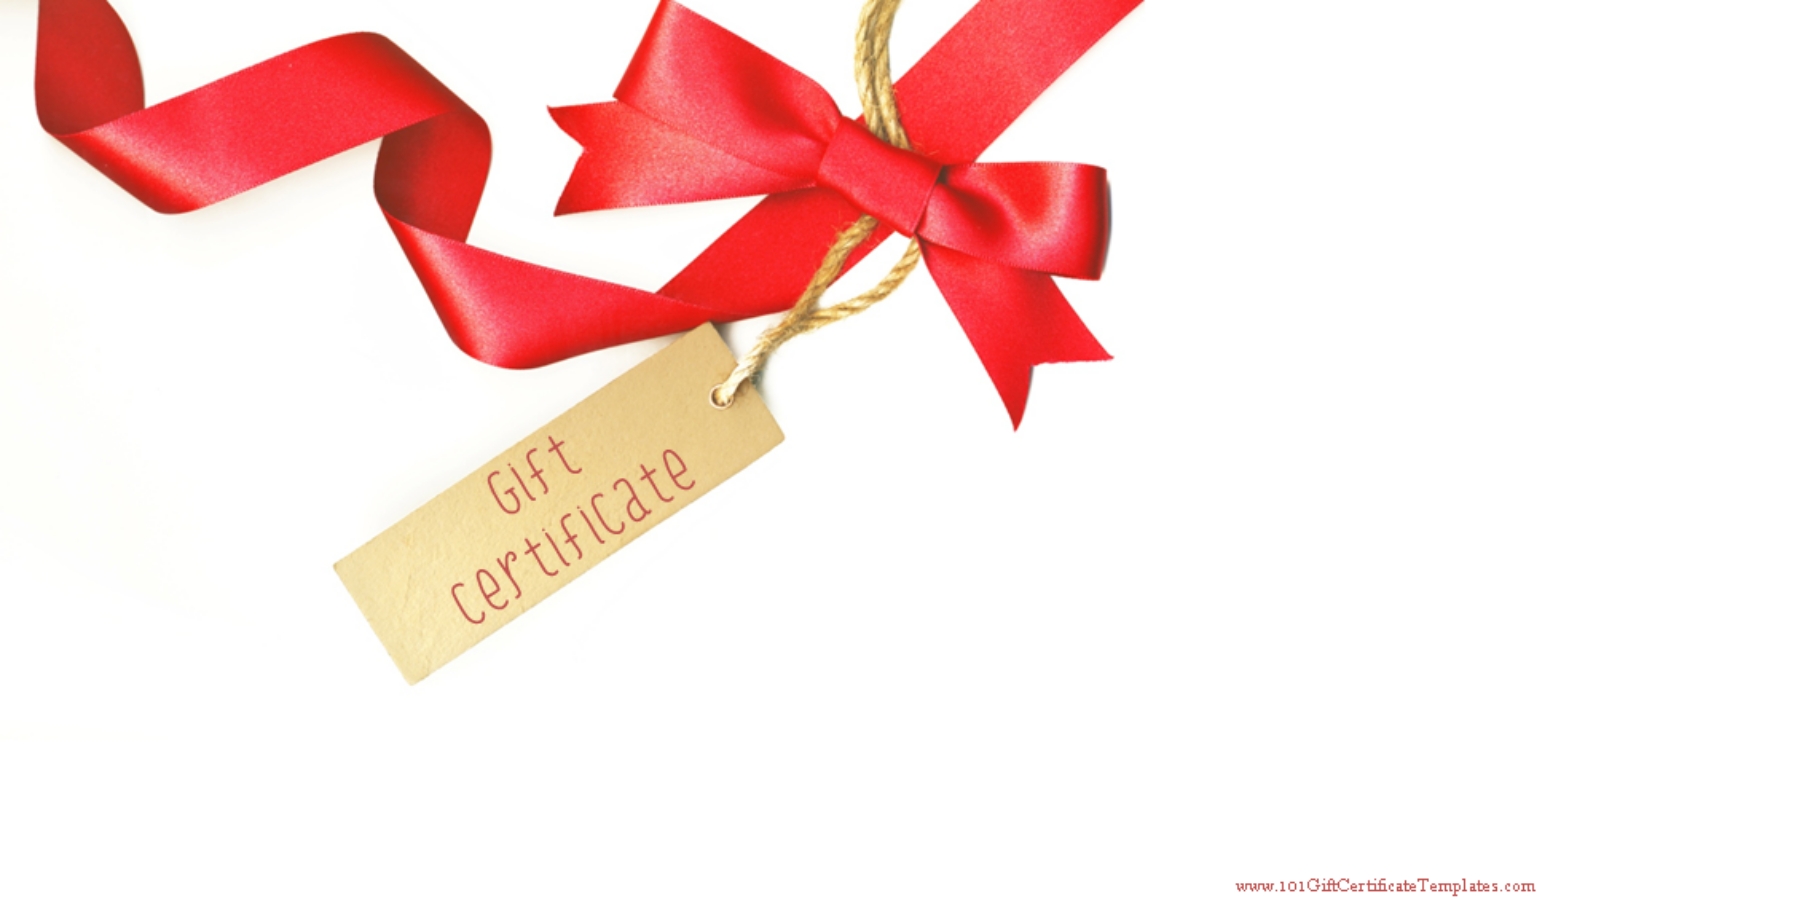 Printable Gift Certificate Templates - 101 Gift Certificate Templates